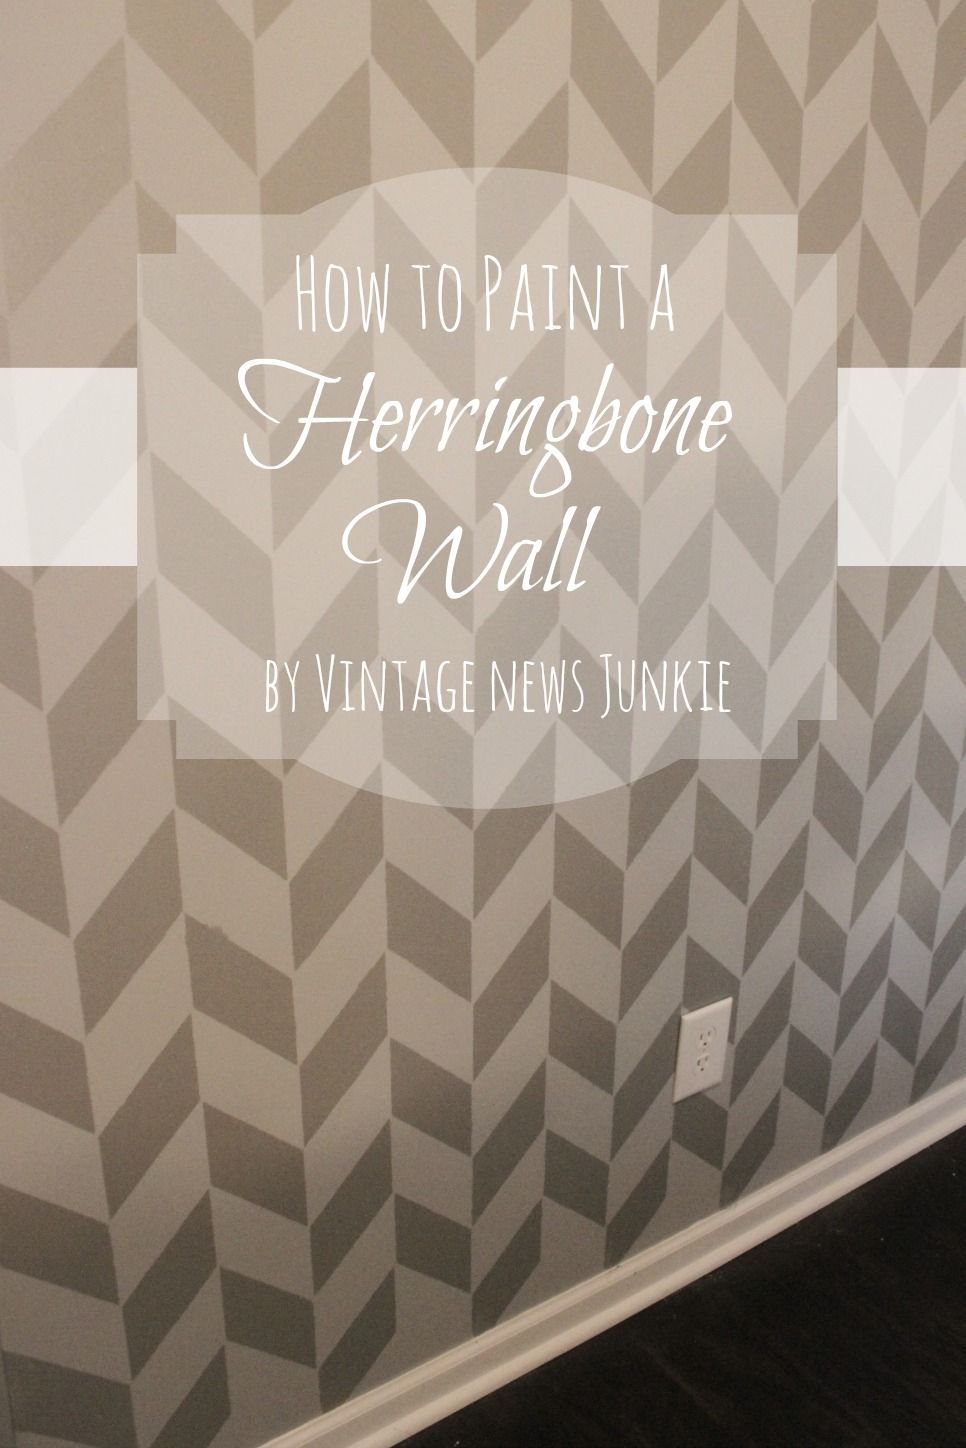 How to Paint a Stencil Wall by Vintage News Junkie